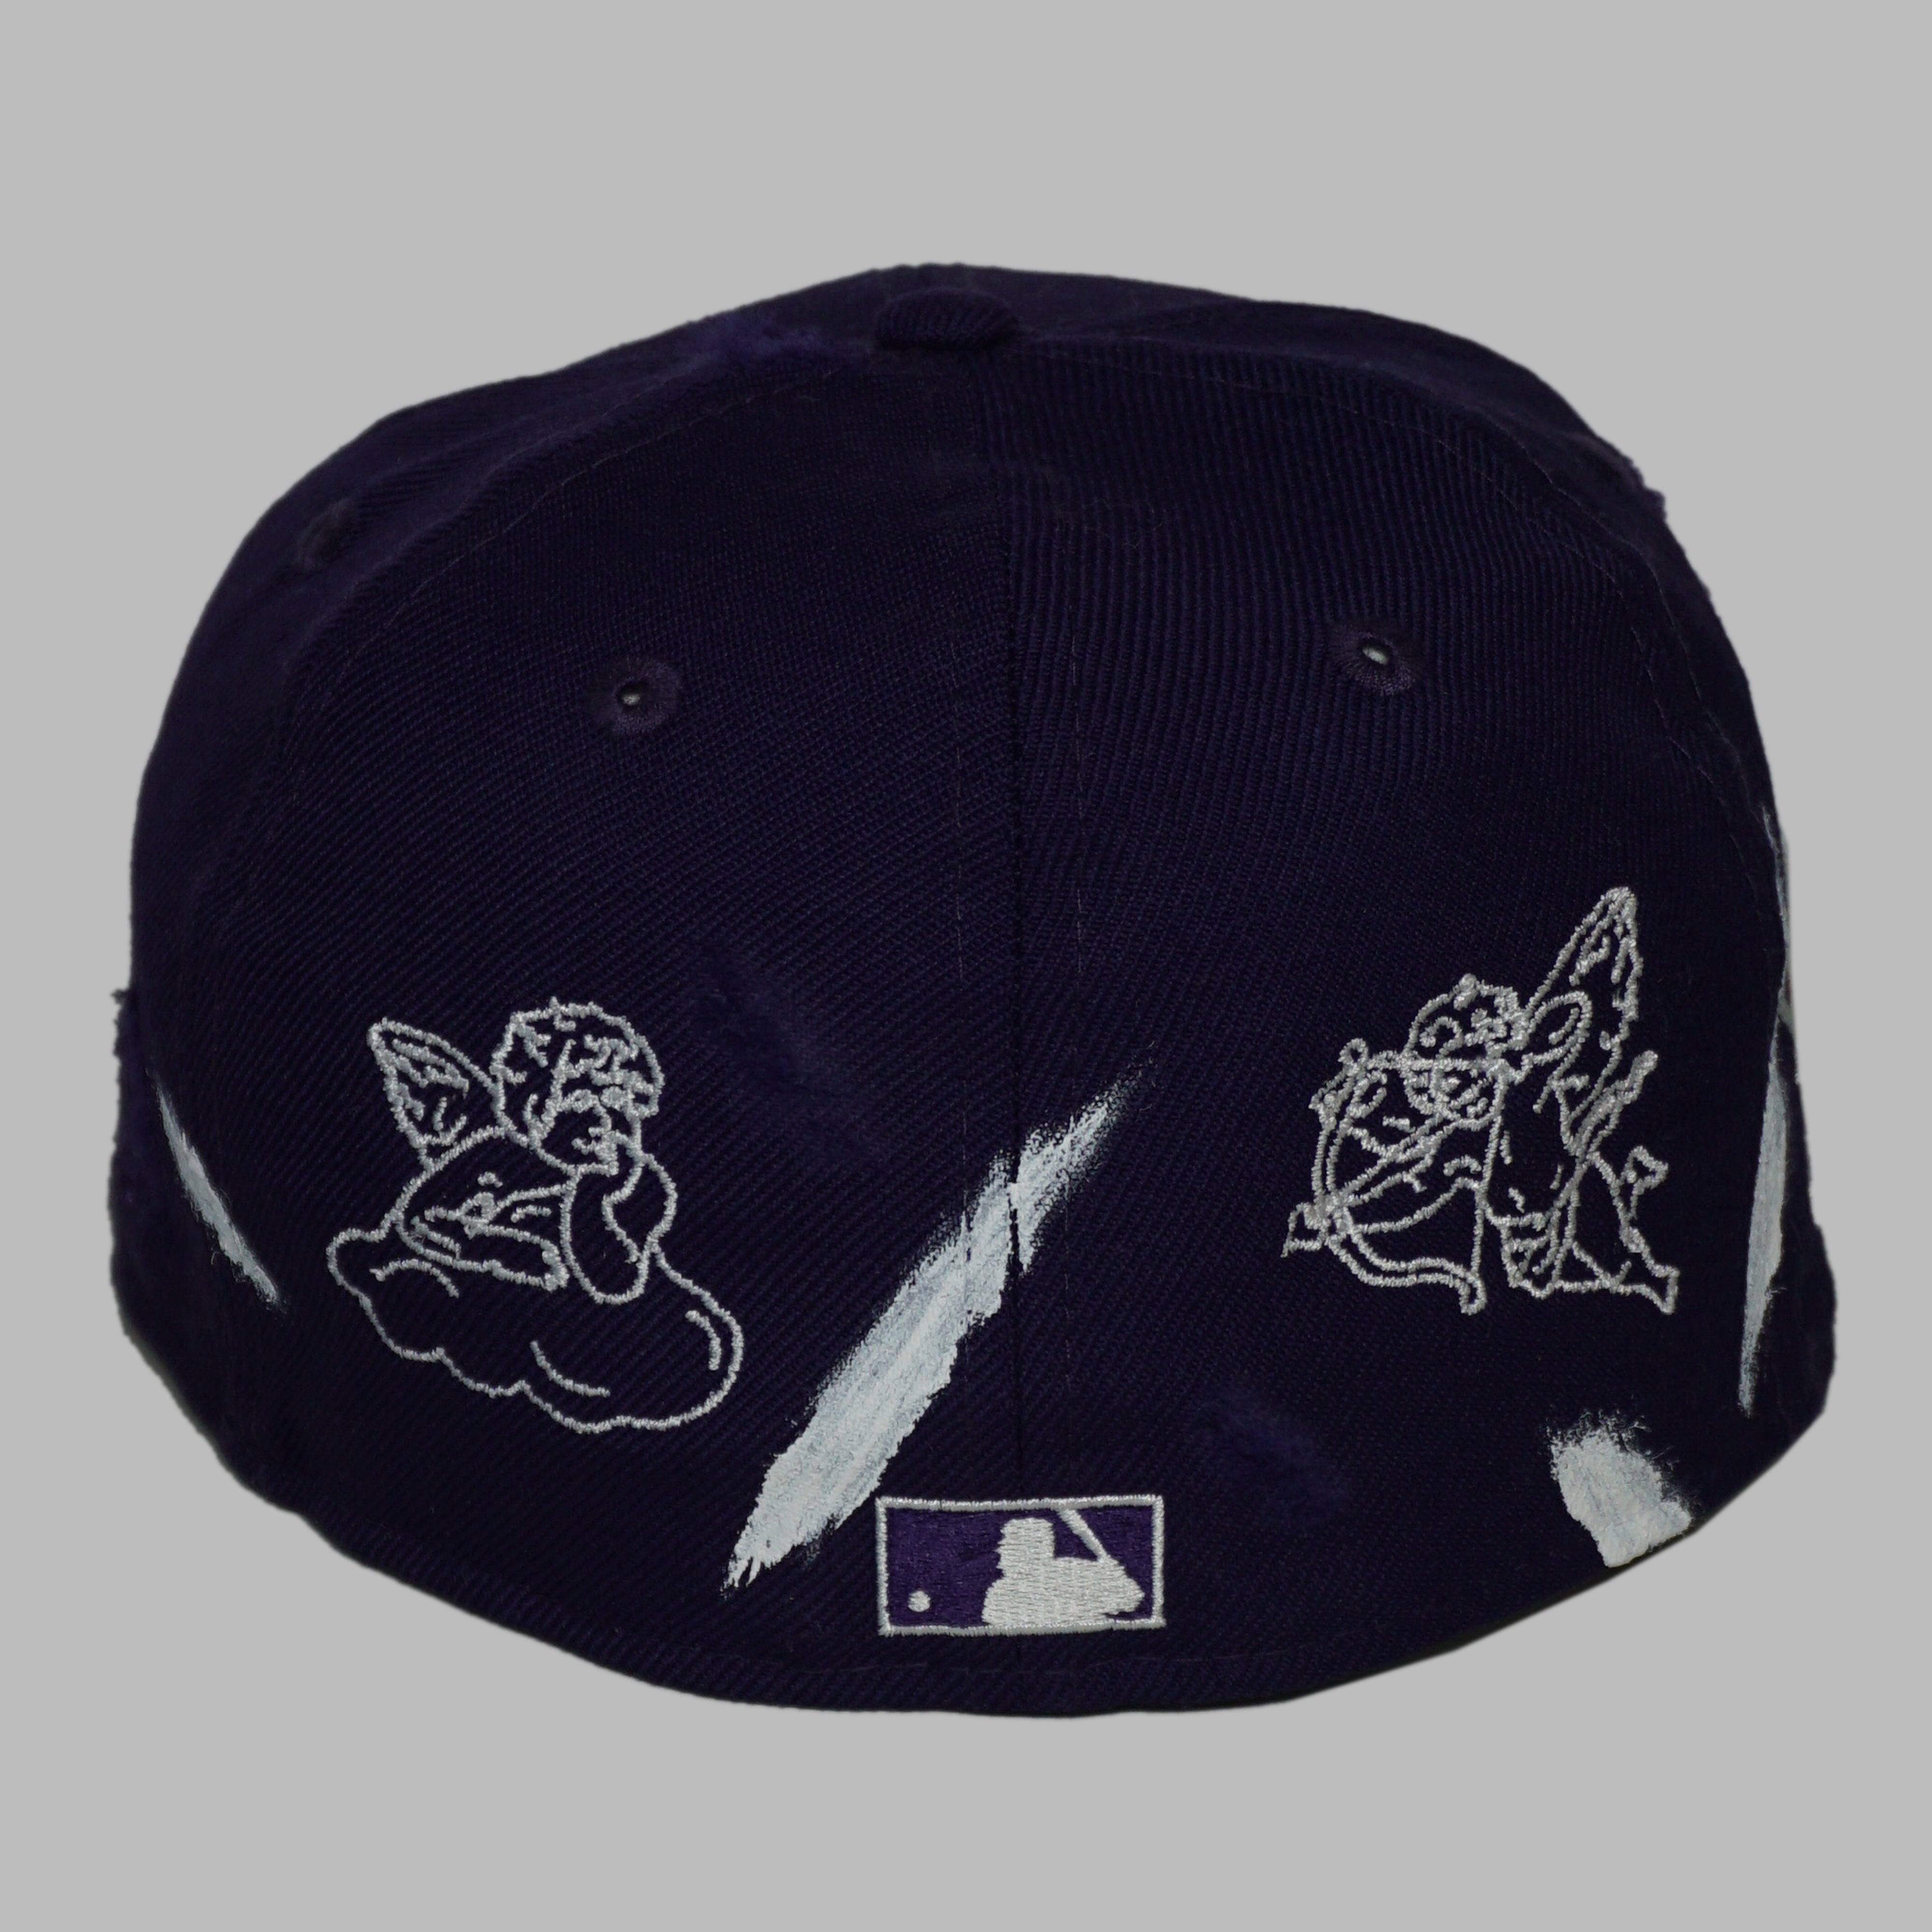 PURPLE HOLY FITTED (size 7 1/8)